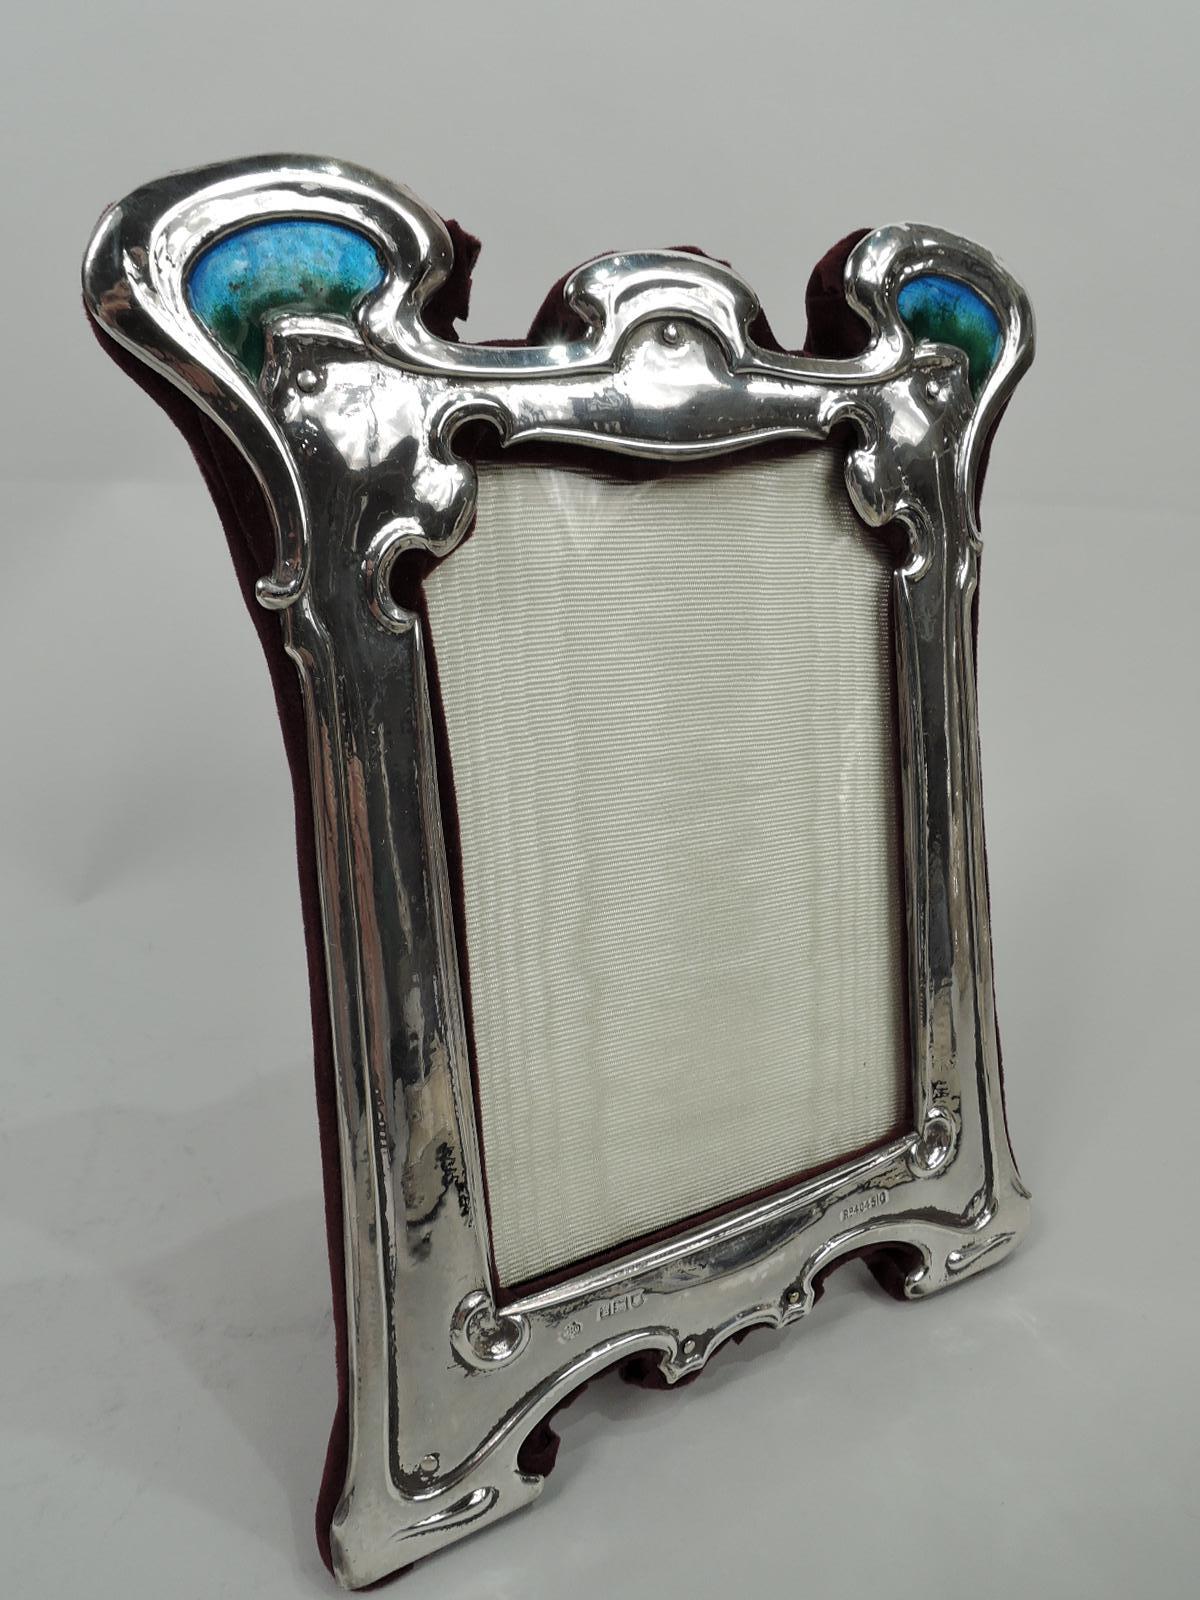 Edwardian Art Nouveau Liberty-style sterling silver picture frame. Made by William Hutton & Sons in London in 1902. Rectangular window with shaped upper corners in curvilinear surround with bracket supports. Top corners have scrolled tendrils inset